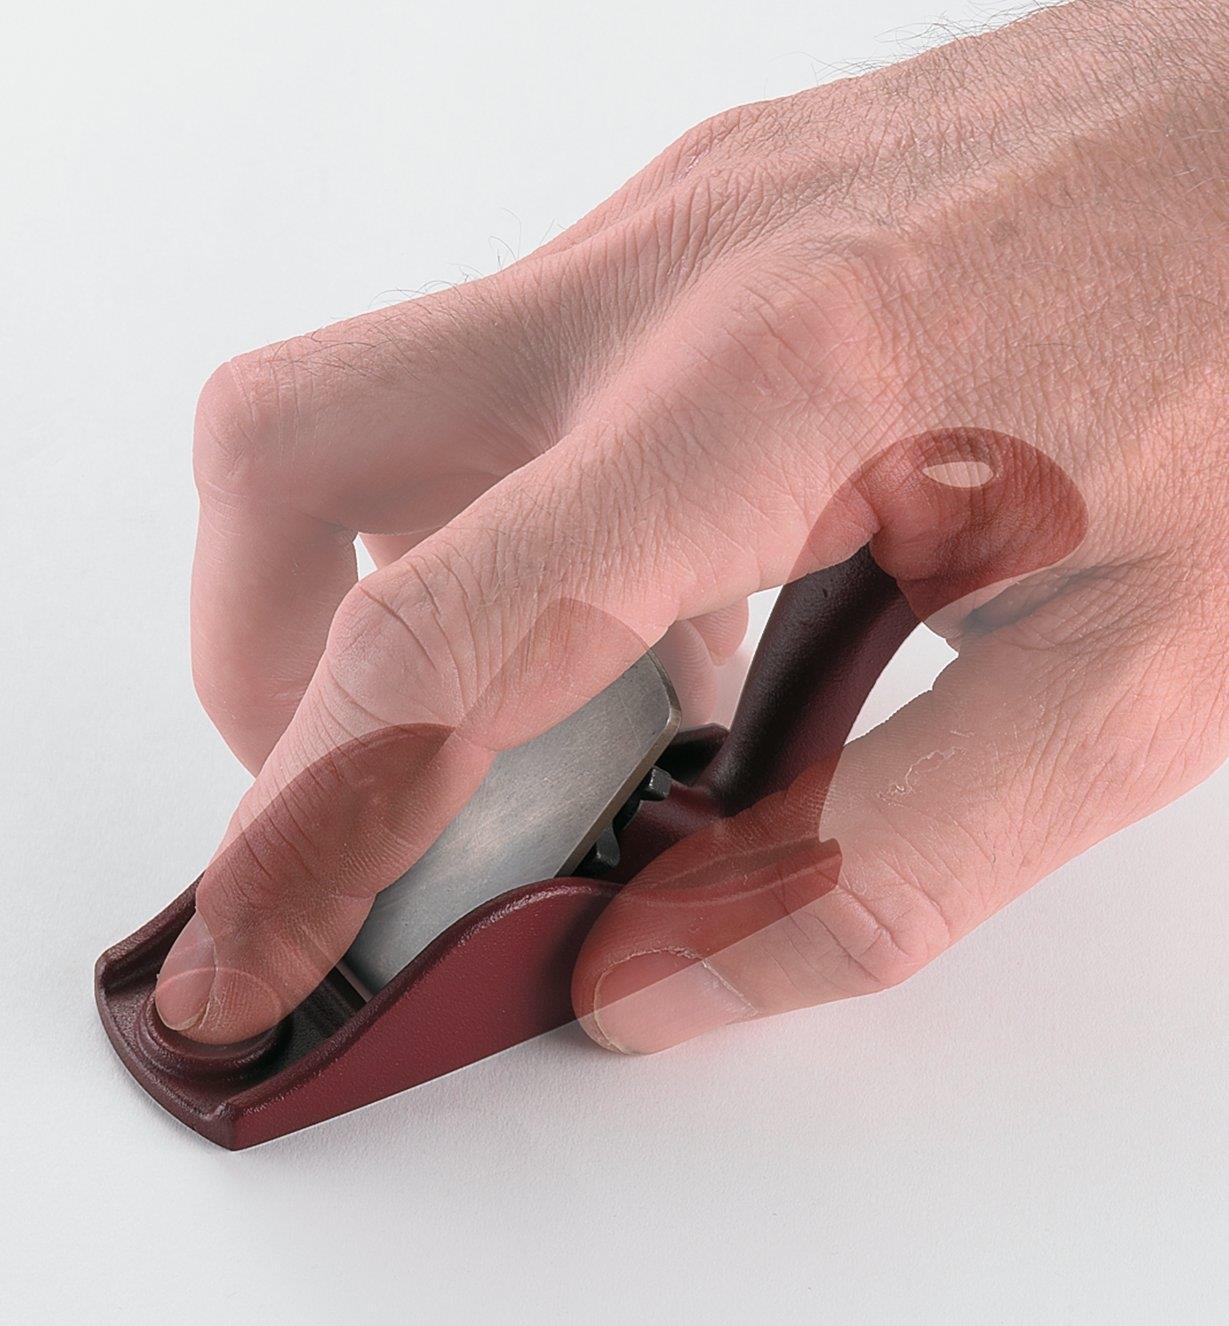 Ghosted image of a person's grip on a flat palm plane 